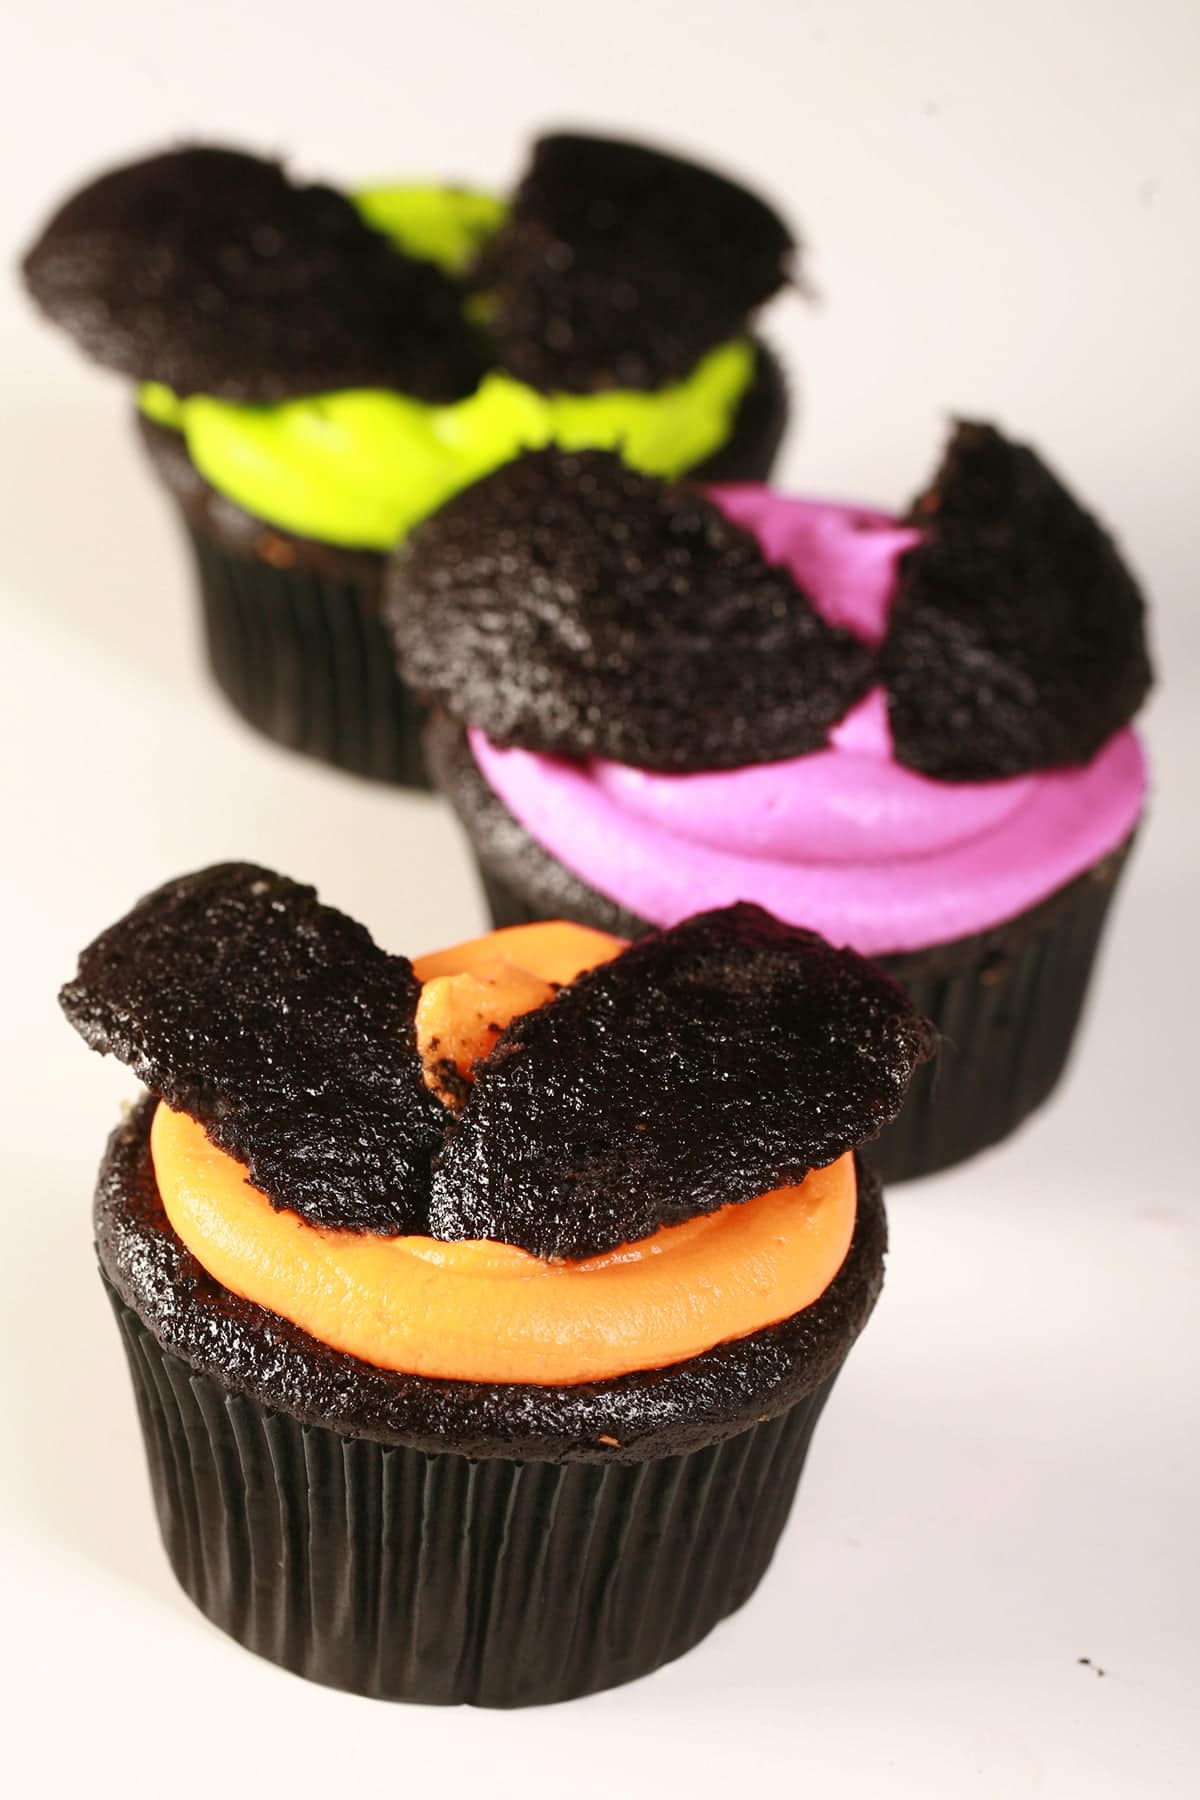 3 Easy Halloween Bat Cupcakes - Black Velvet Cupcakes with the dome cut off, frosted with brightly coloured icing - electric purple, lime green, and orange - then the halved dome of the cupcake is re-positioned on top to form bat wings.